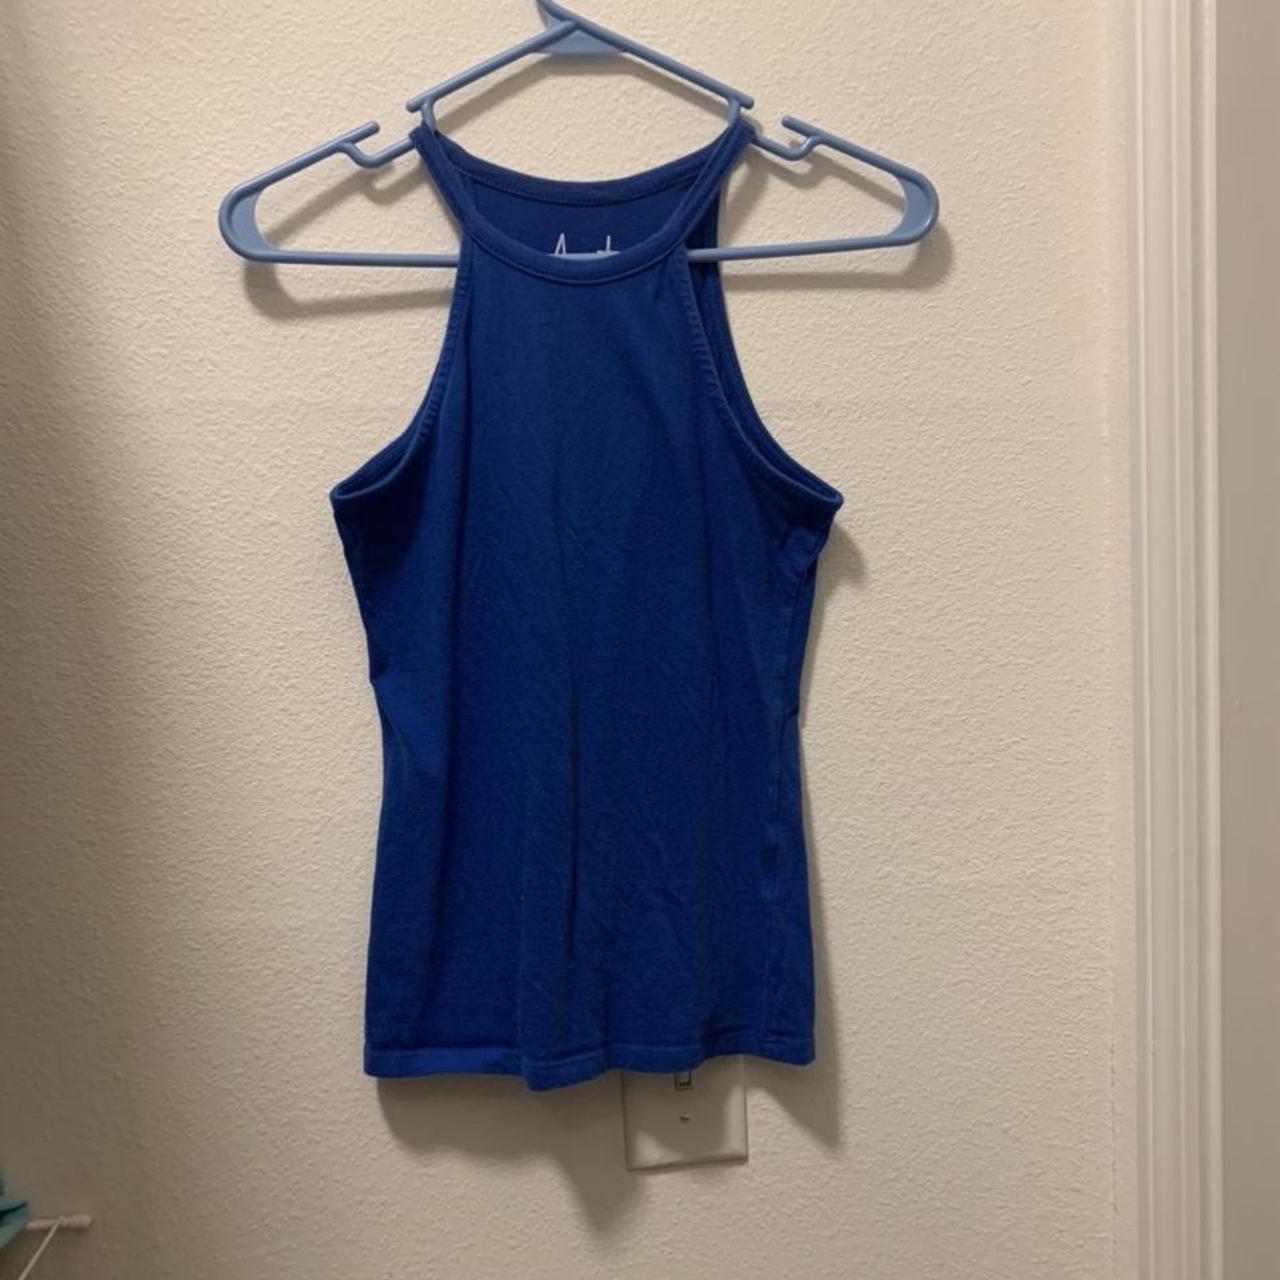 Product Image 1 - Blue High Neck Tank Top

Size